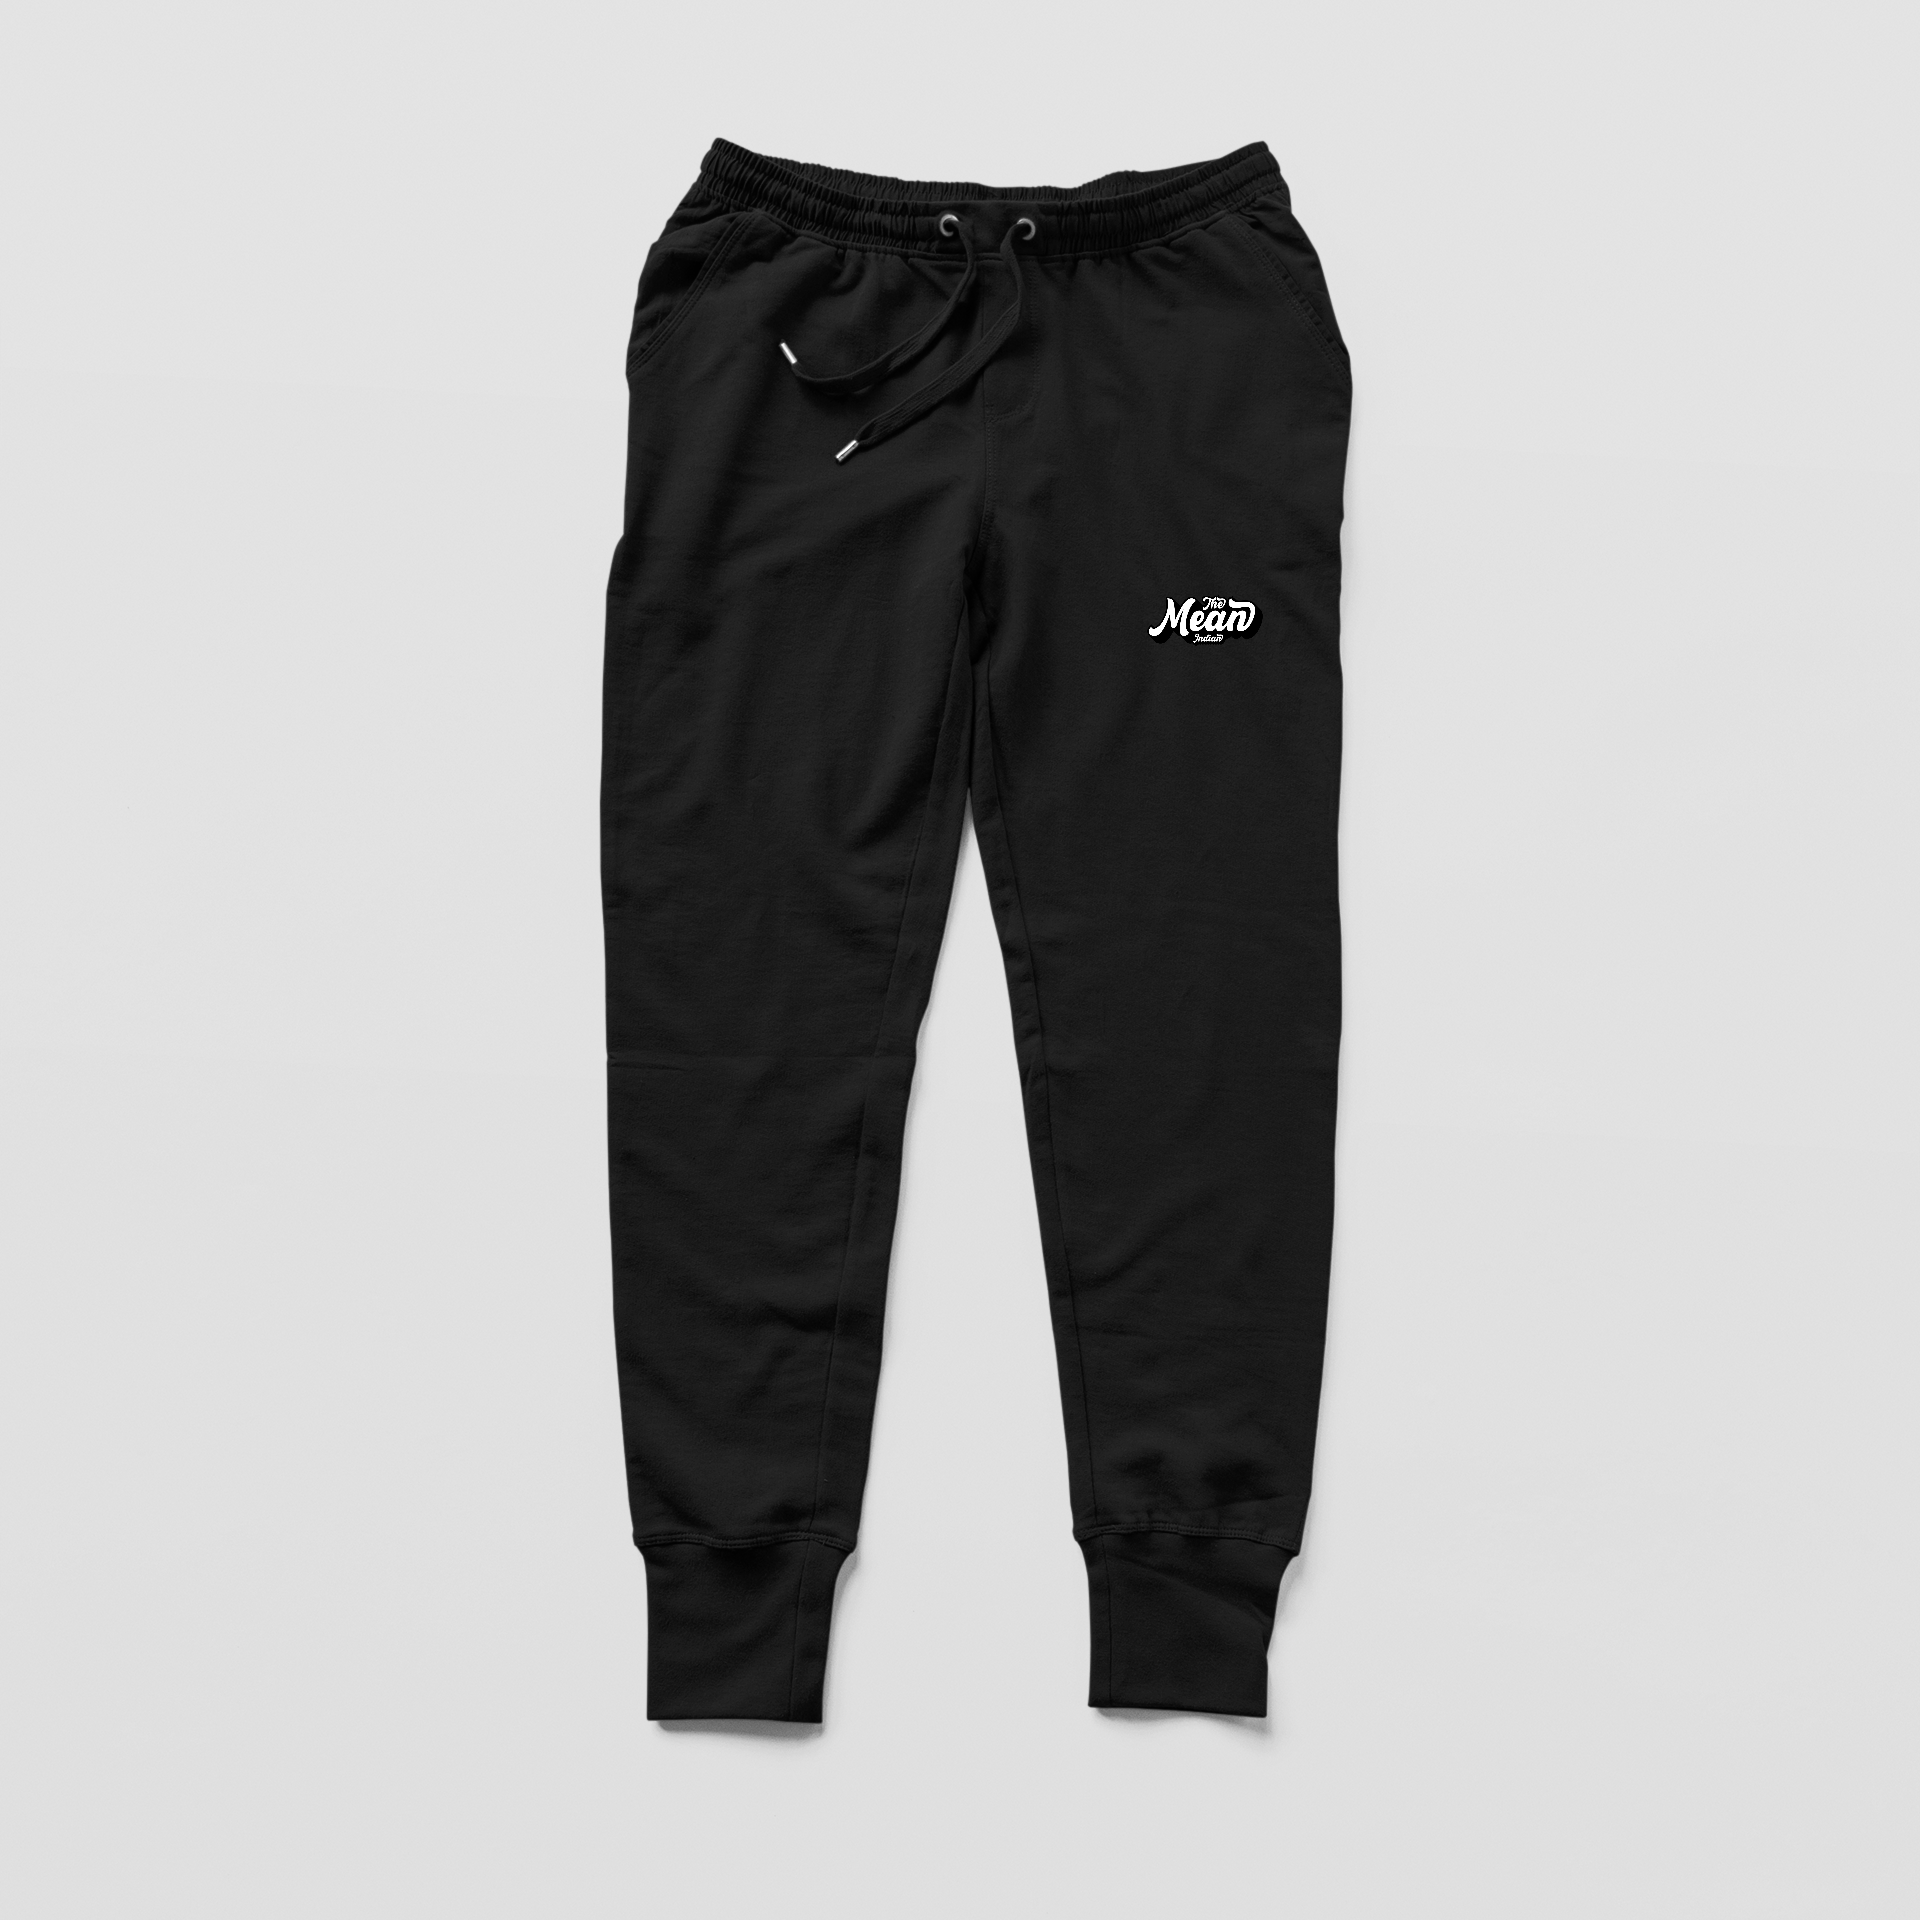 Black Joggers The Mean Indian Store